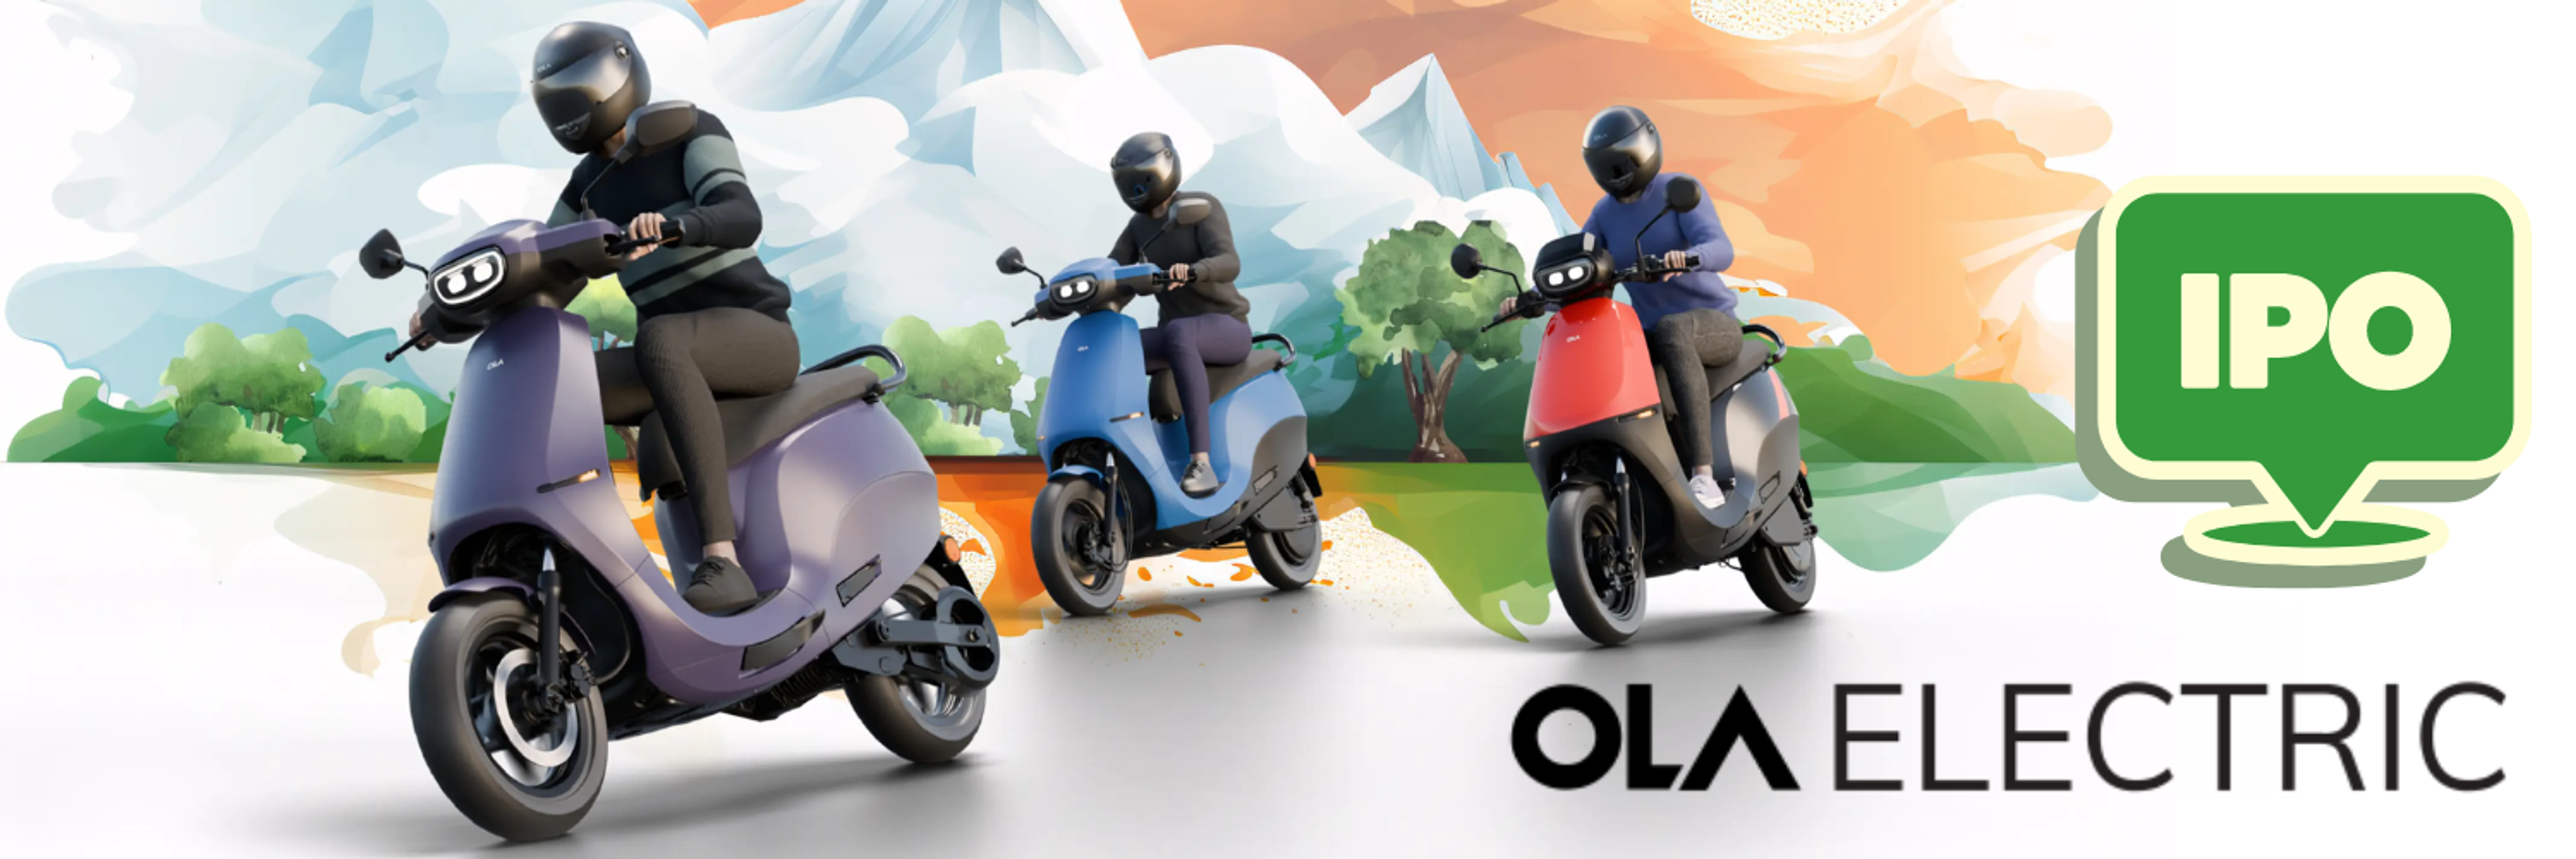 This image shows a promotional banner for Ola Electric's Initial Public Offering (IPO). It features three riders, each on a different colored electric scooter (purple, blue, and red), moving across a stylized, colorful landscape. The background blends abstract shapes in green, orange, and blue, suggesting mountains and trees, creating a dynamic and eco-friendly theme. To the right, there's a prominent "IPO" sign in green with the Ola Electric logo above it, emphasizing the event. The overall design is modern and appealing, geared towards attracting investors and environmentally conscious consumers.